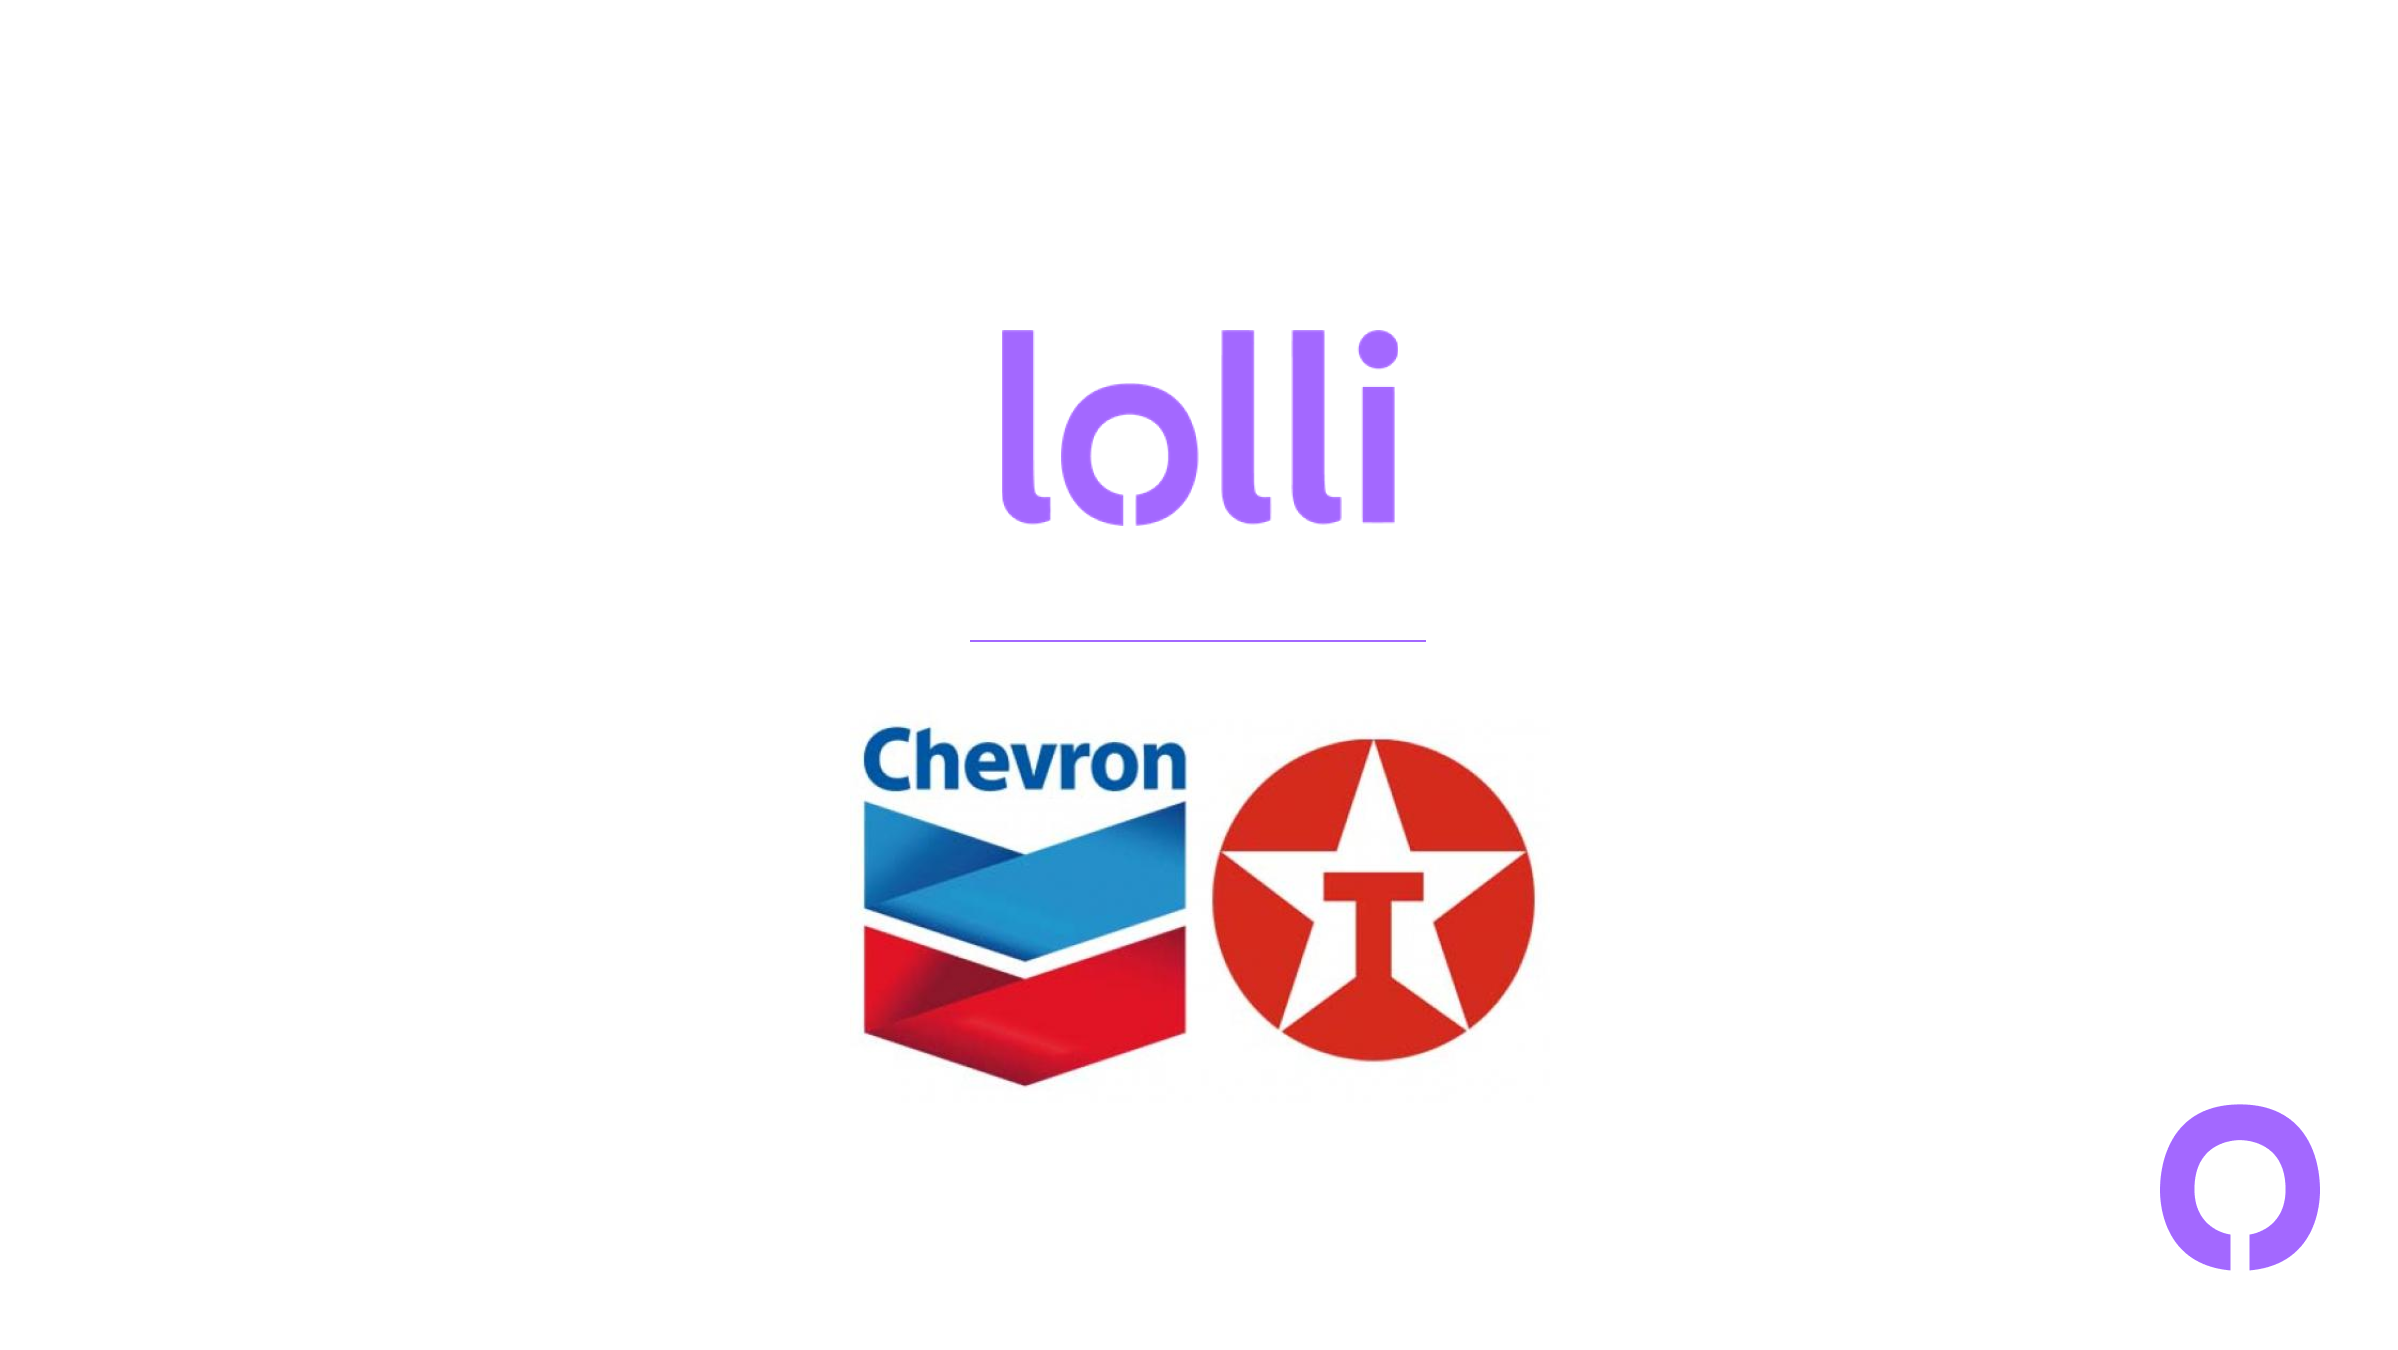 BREAKING: LOLLI PARTNERS WITH CHEVRON TO OFFER BITCOIN REWARDS